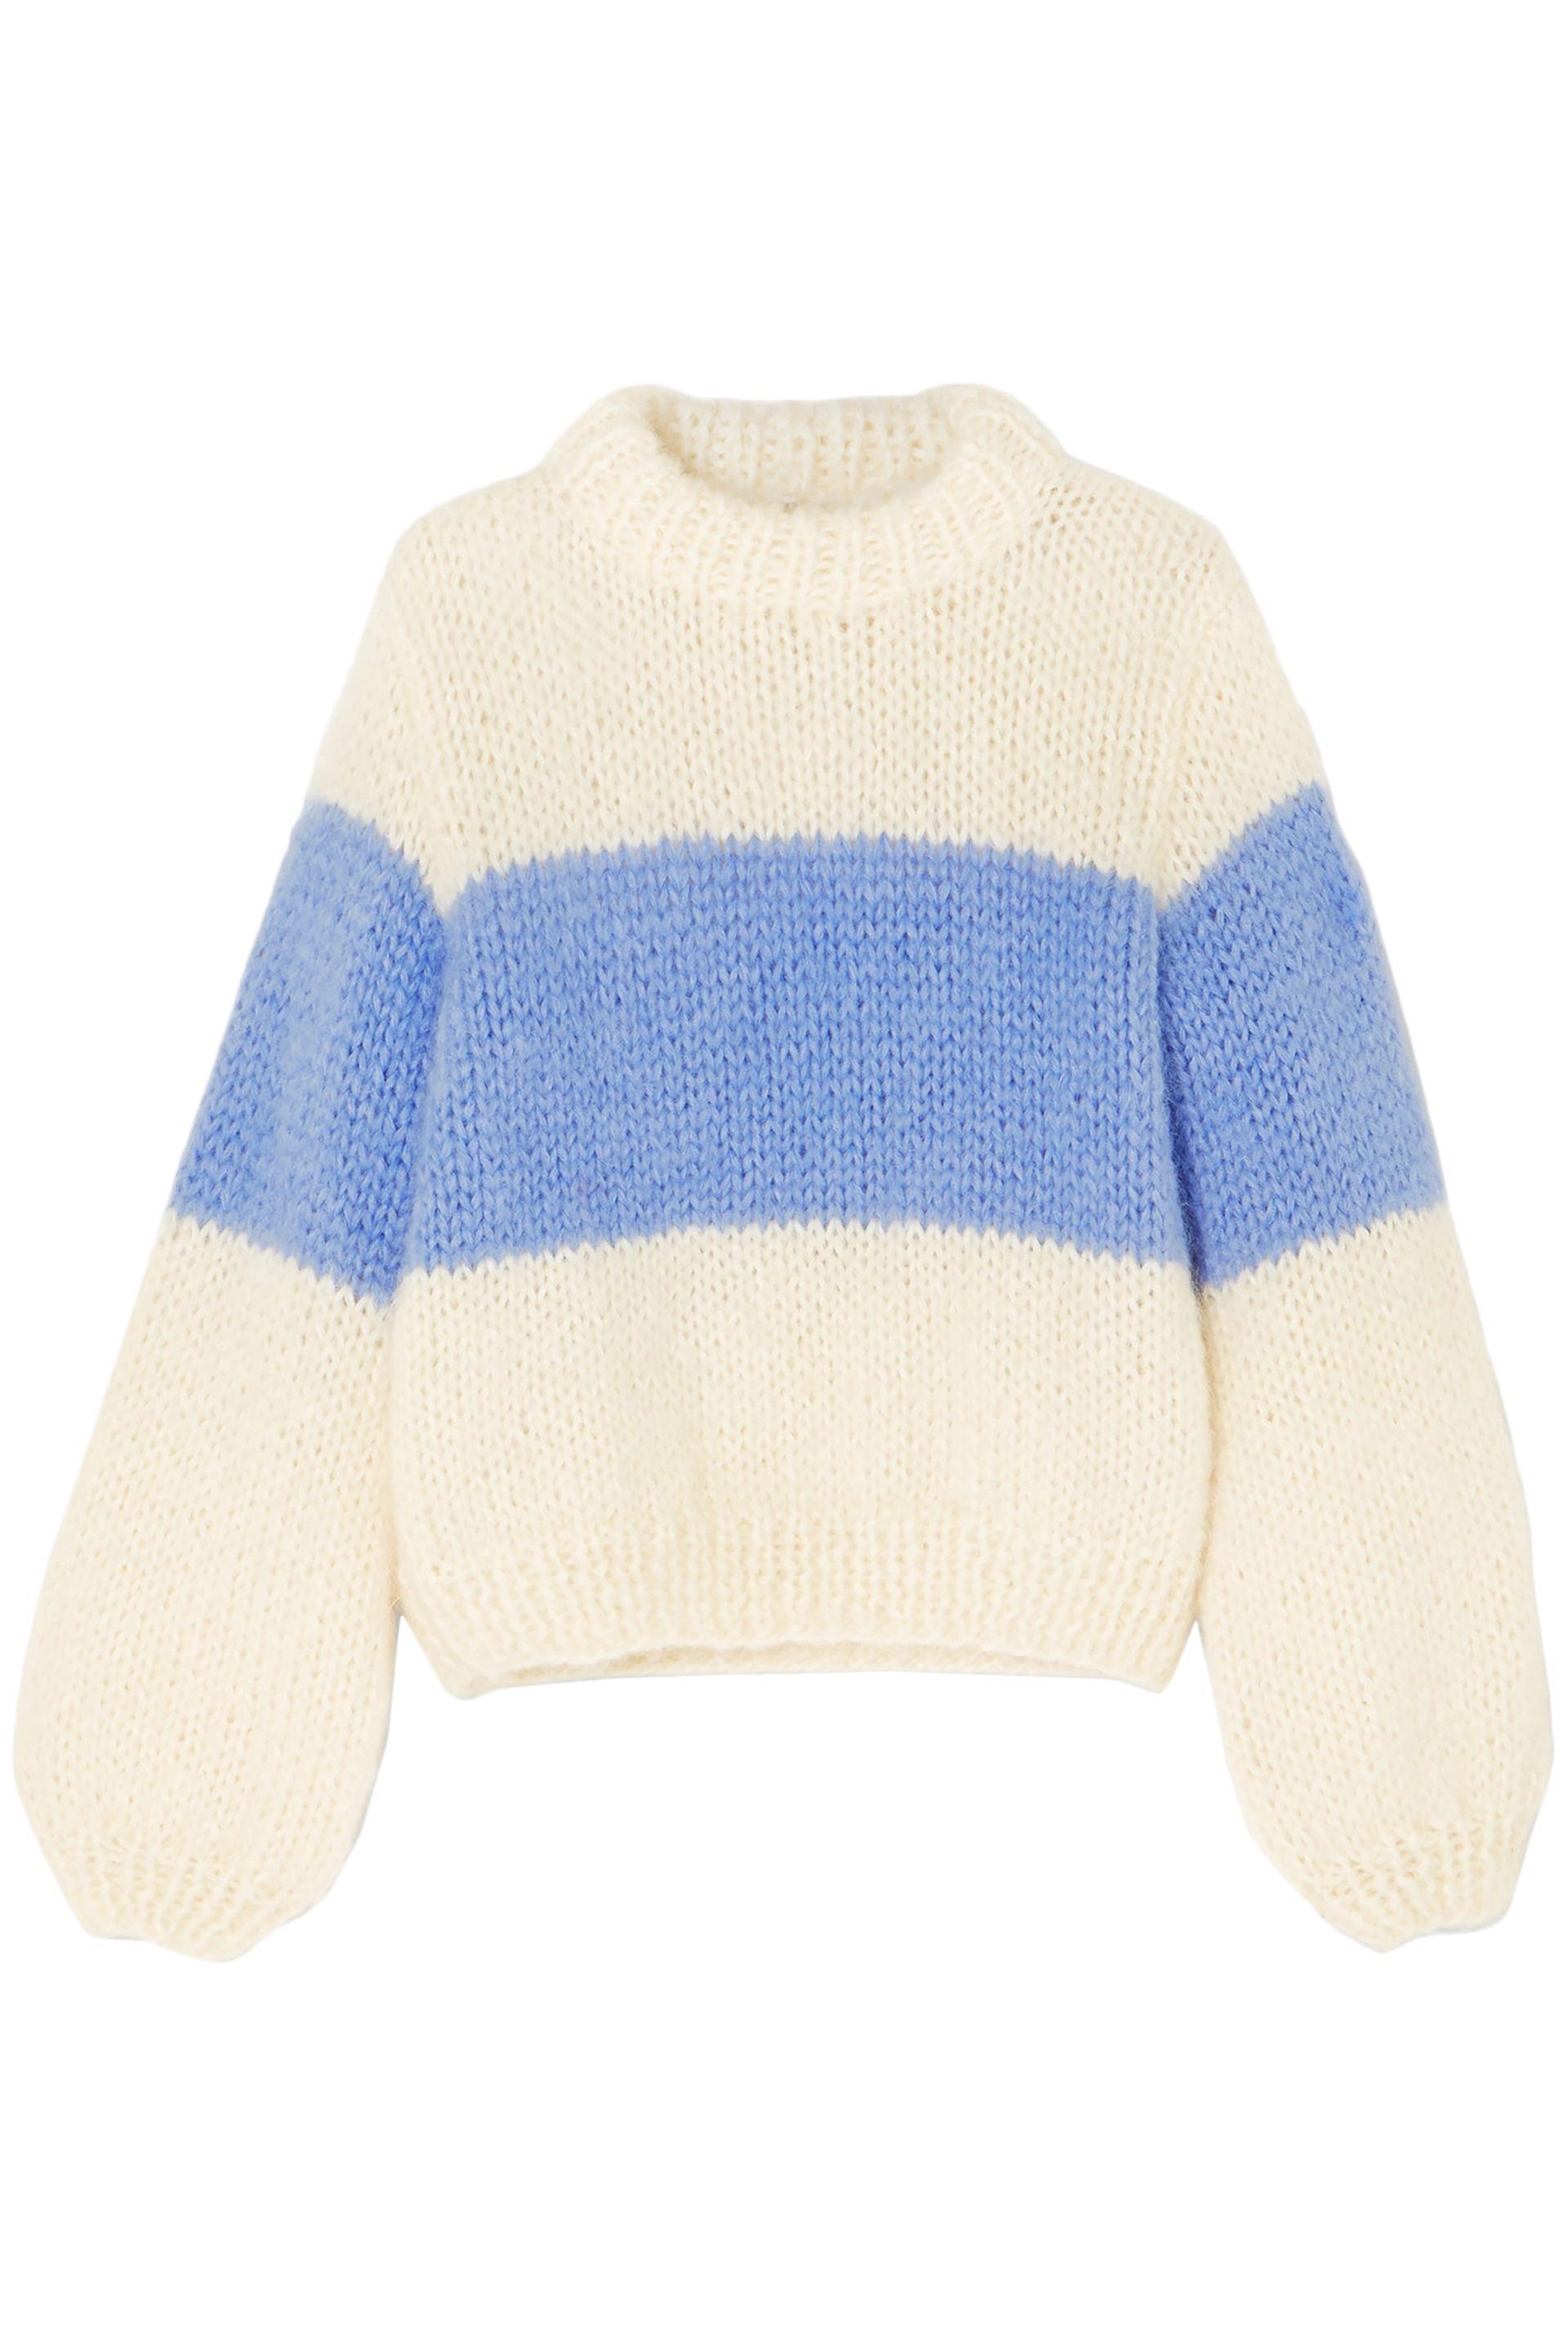 Ganni Striped Mohair And Wool-blend Sweater in Blue | Lyst